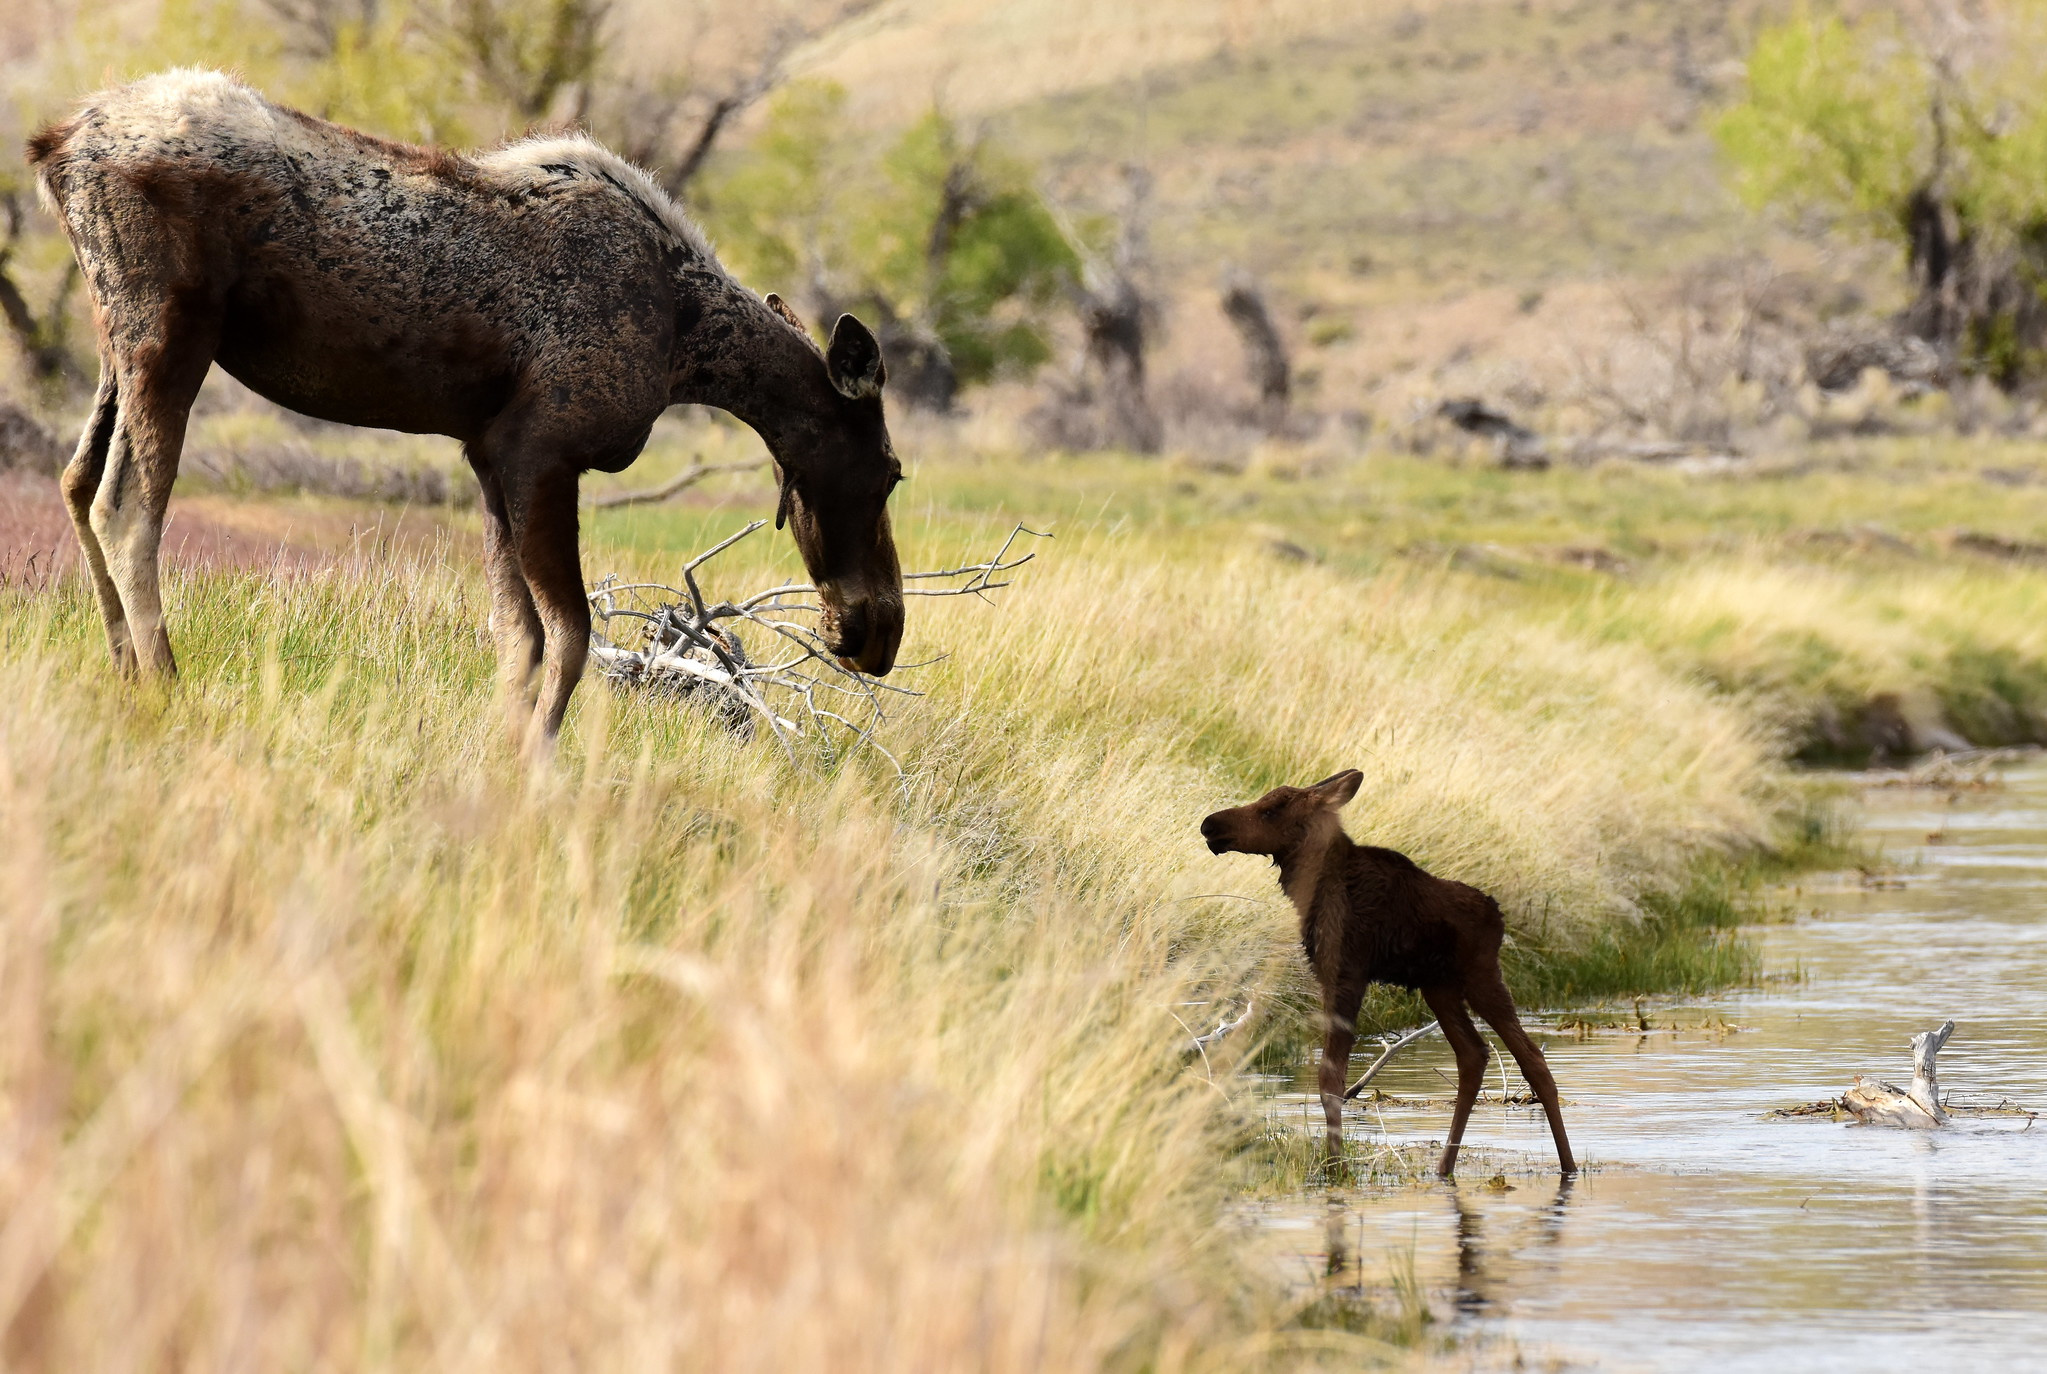 cow moose with calf near water